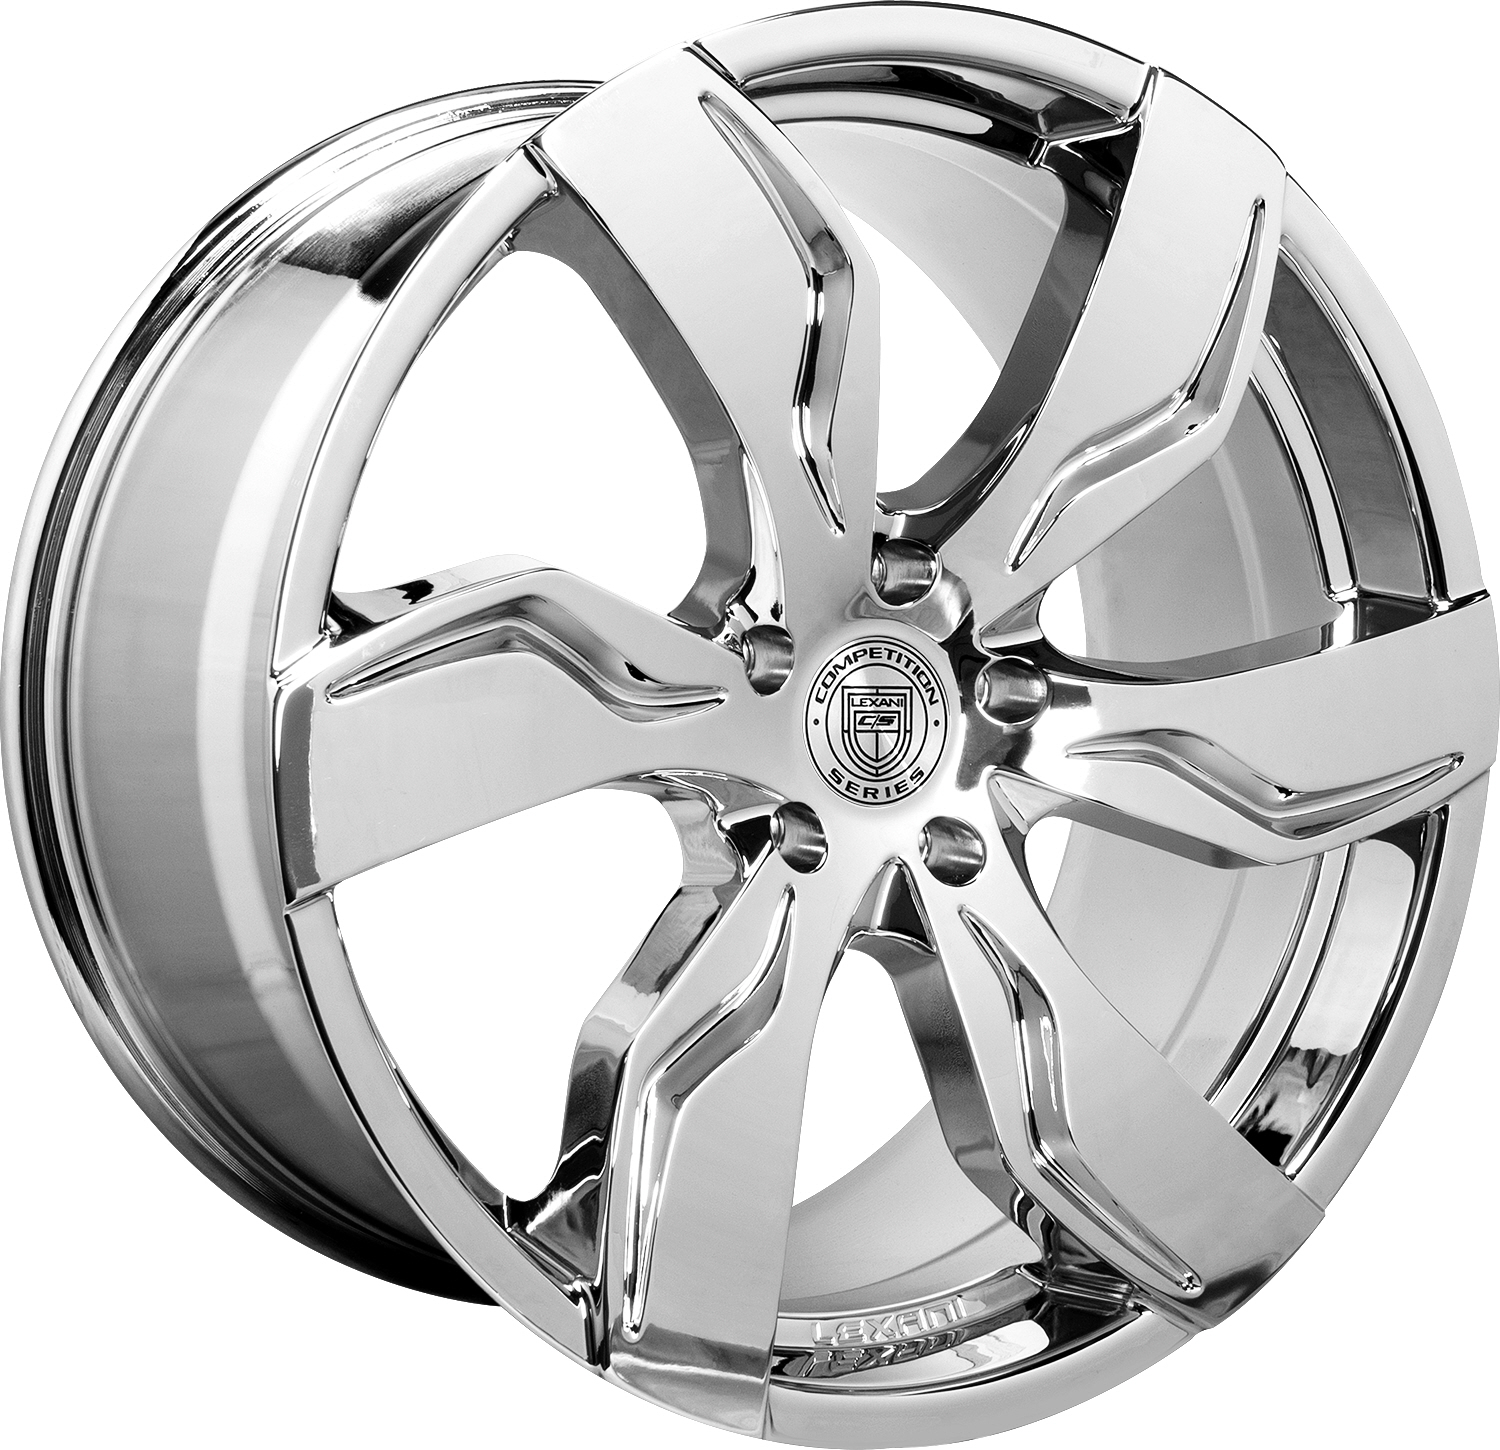 675 - ZAGATO  WHEELS AND RIMS PACKAGES